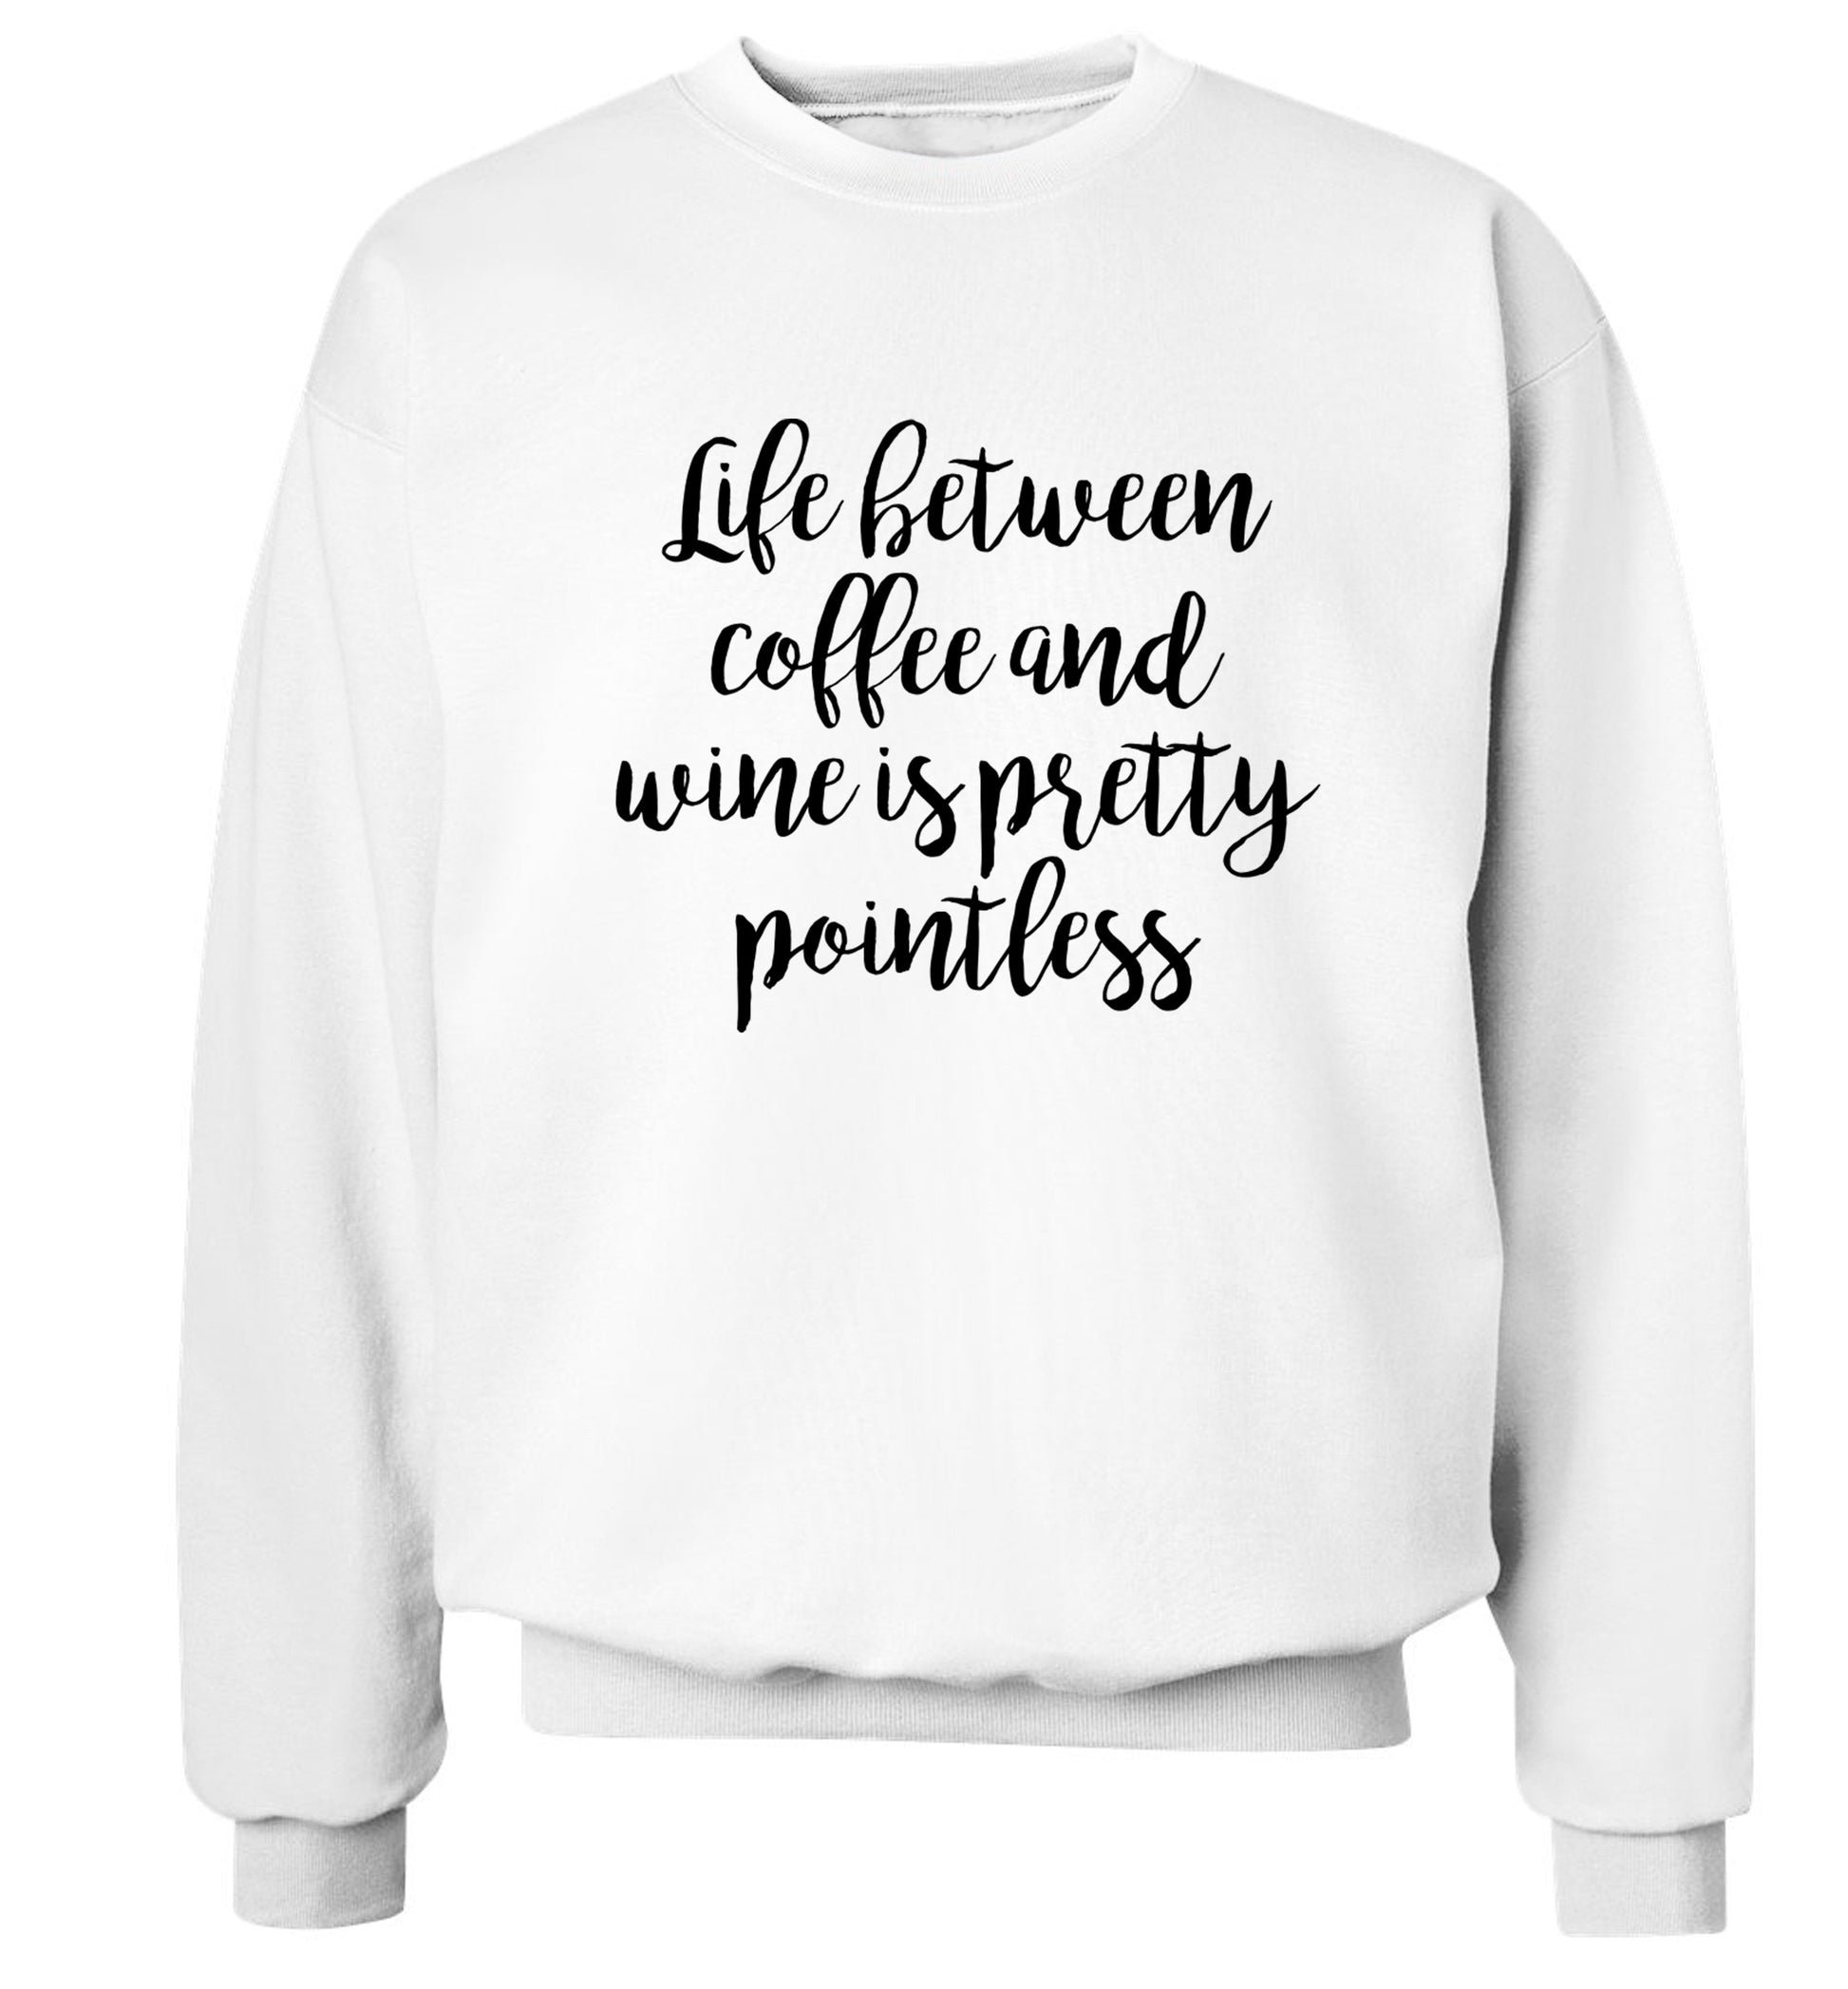 Life between coffee and wine is pretty pointless Adult's unisex white Sweater 2XL